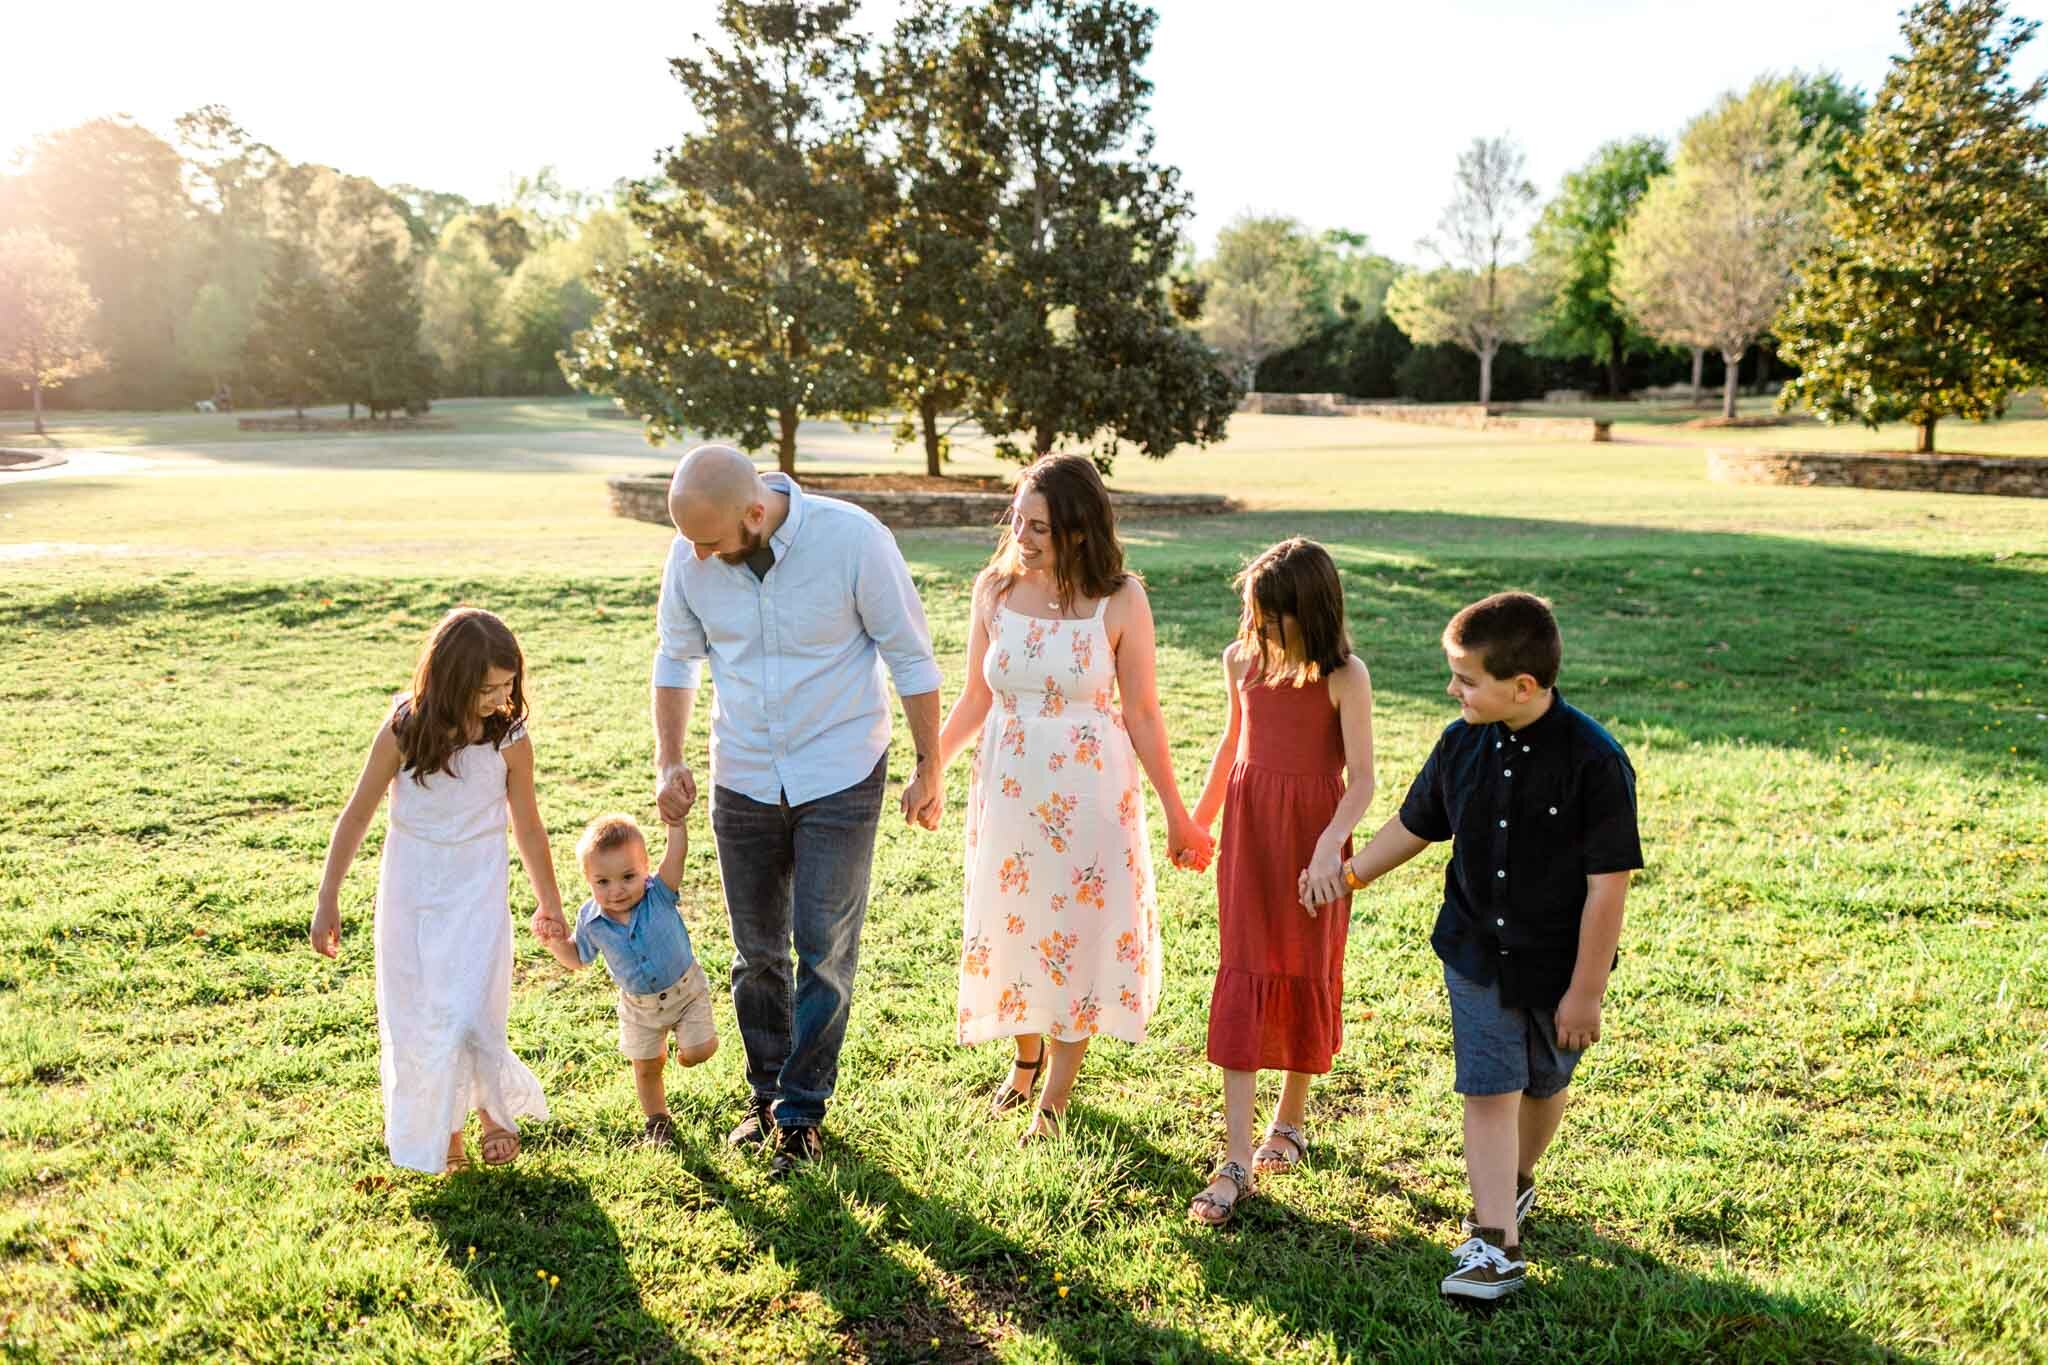 Raleigh Family Photographer | Joyner Park | By G. Lin Photography | Family walking together outdoors